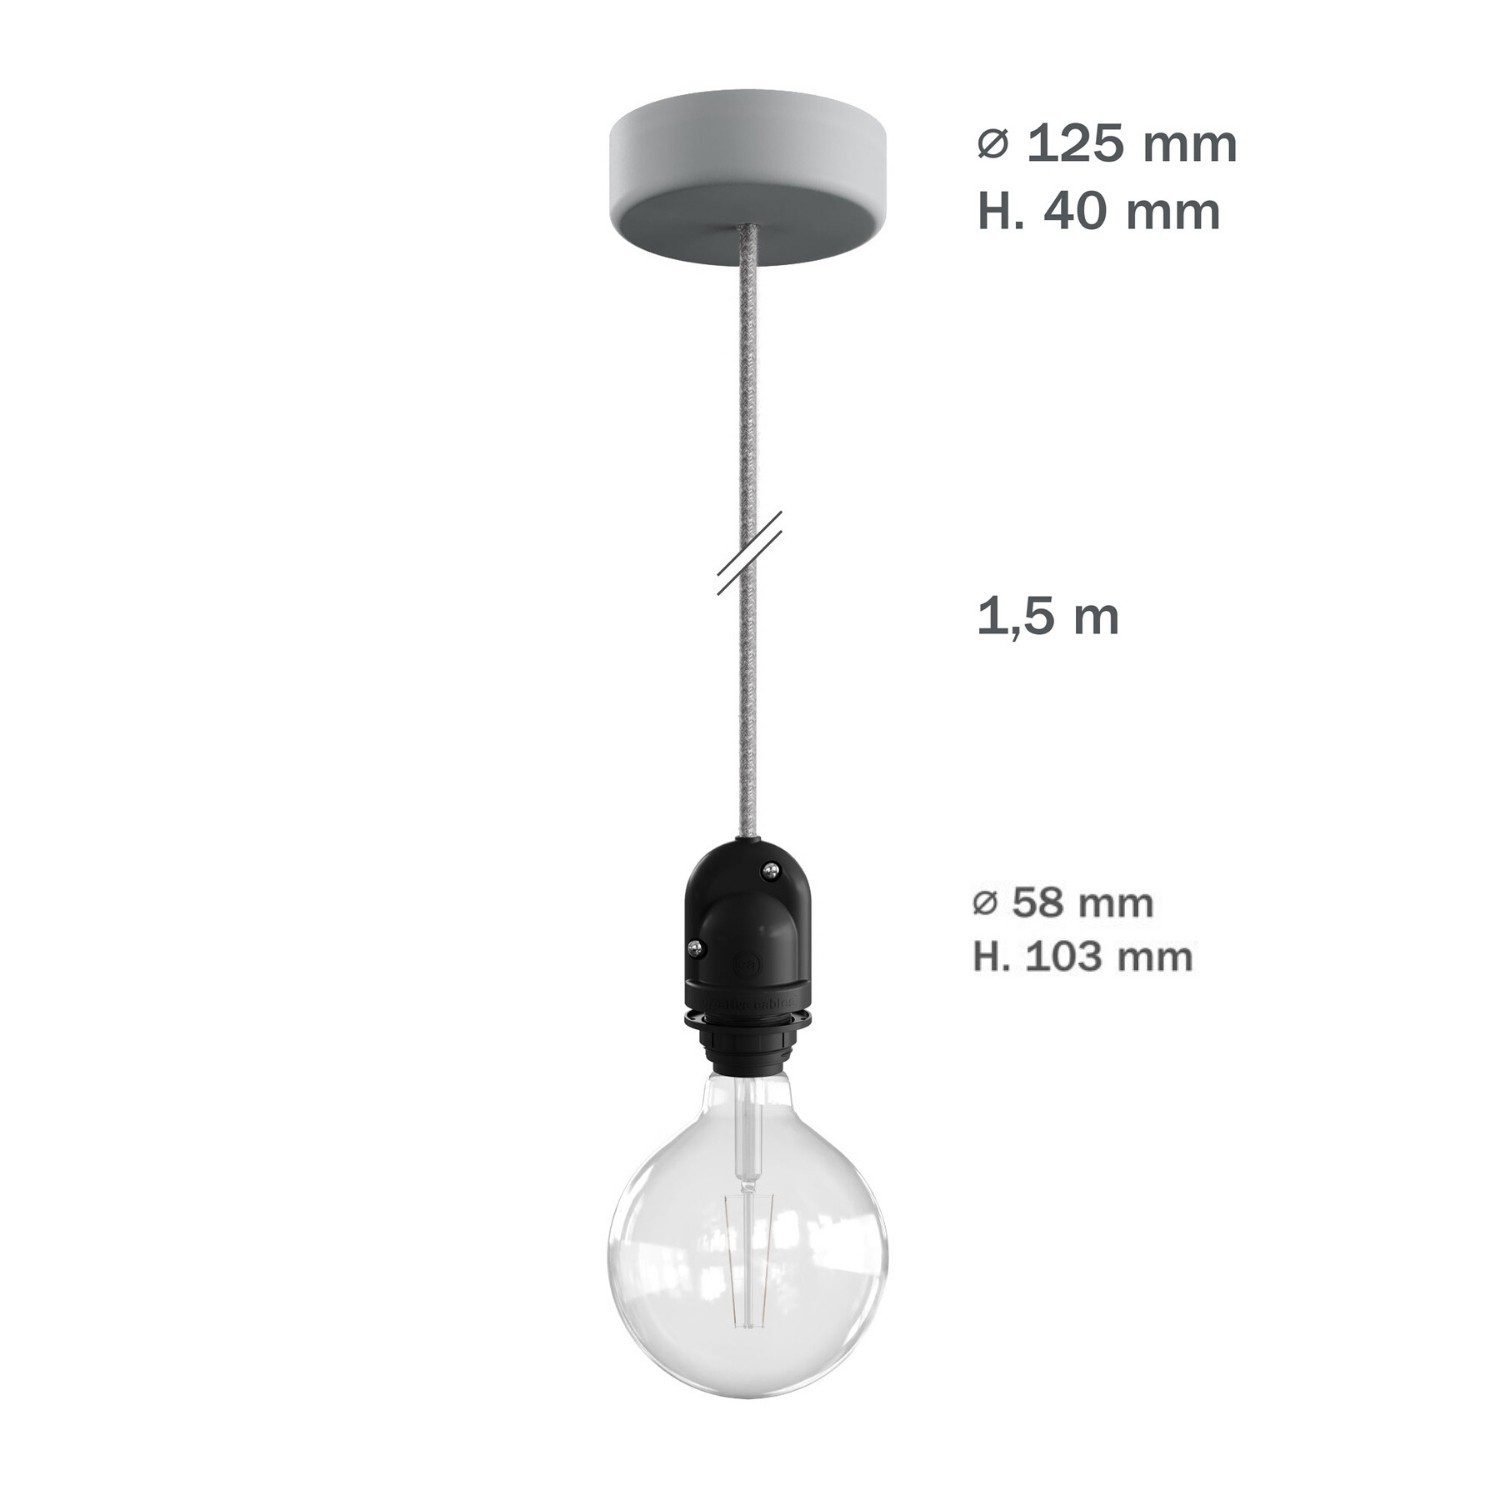 EIVA Outdoor pendant lamp for lampshades with 1,5 mt textile cable, silicone ceiling rose and lamp holder IP65 water resistant